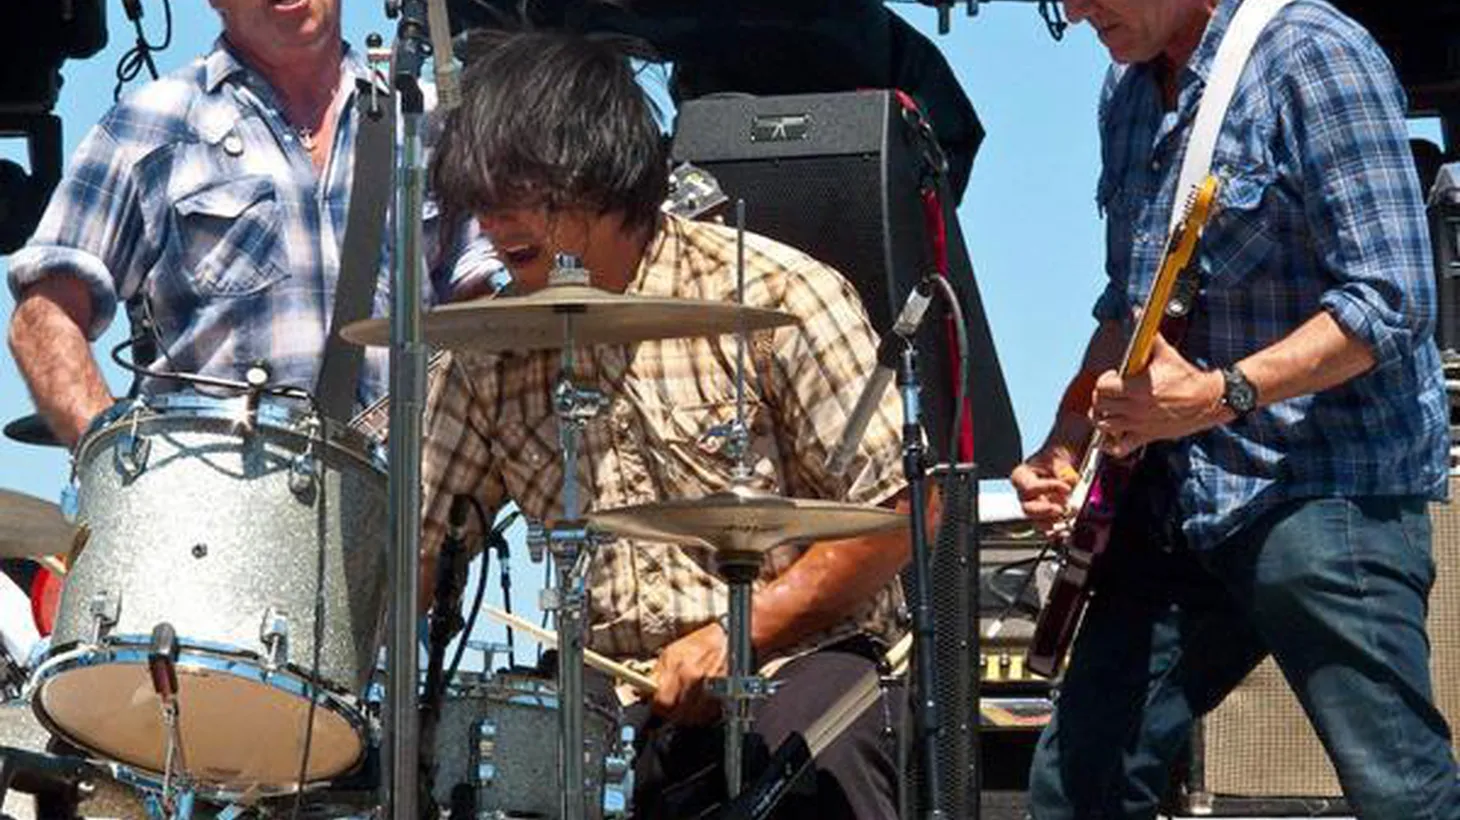 Mike Watt co-founded one of the most beloved So Cal punk bands, the Minutemen. One of the acclaimed bass players in modern rock history, he brings his band Missingmen...